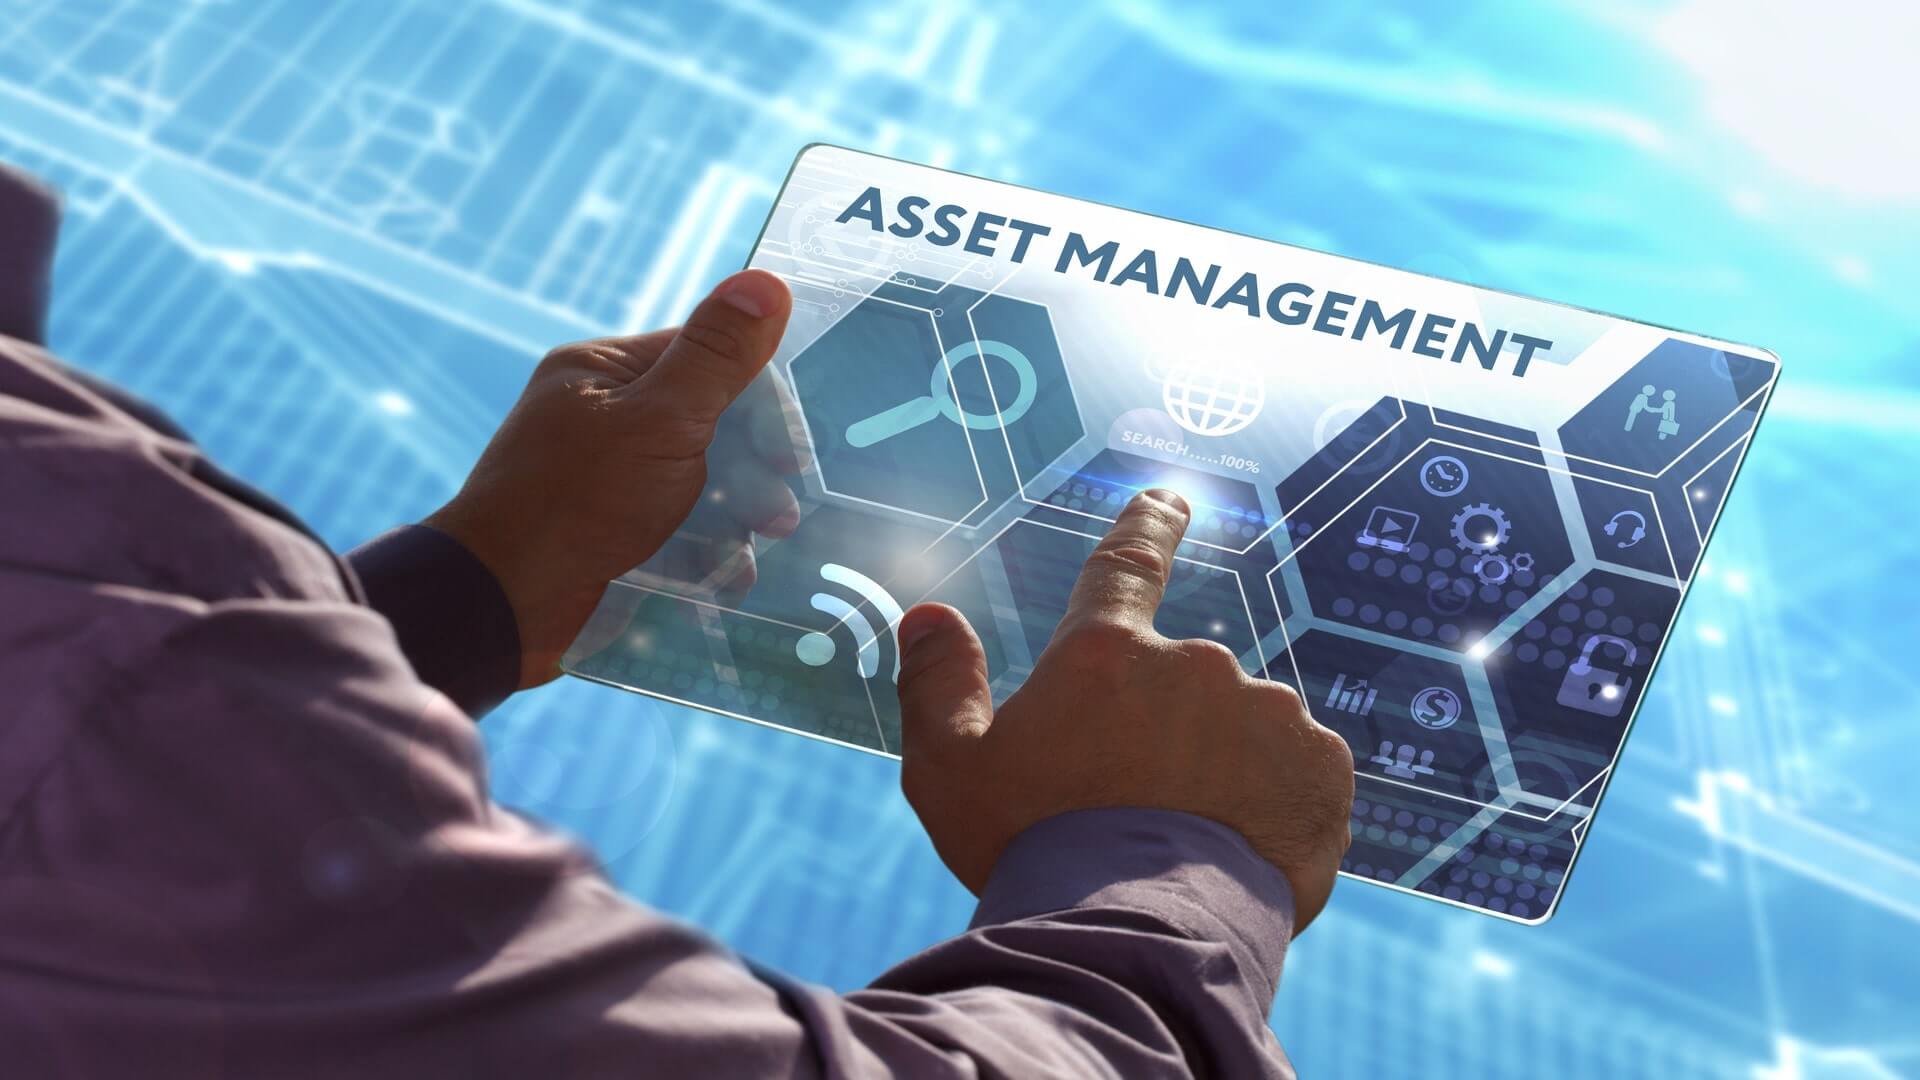 Man clicking a futuristic tablet with icons and the title Asset Management on it